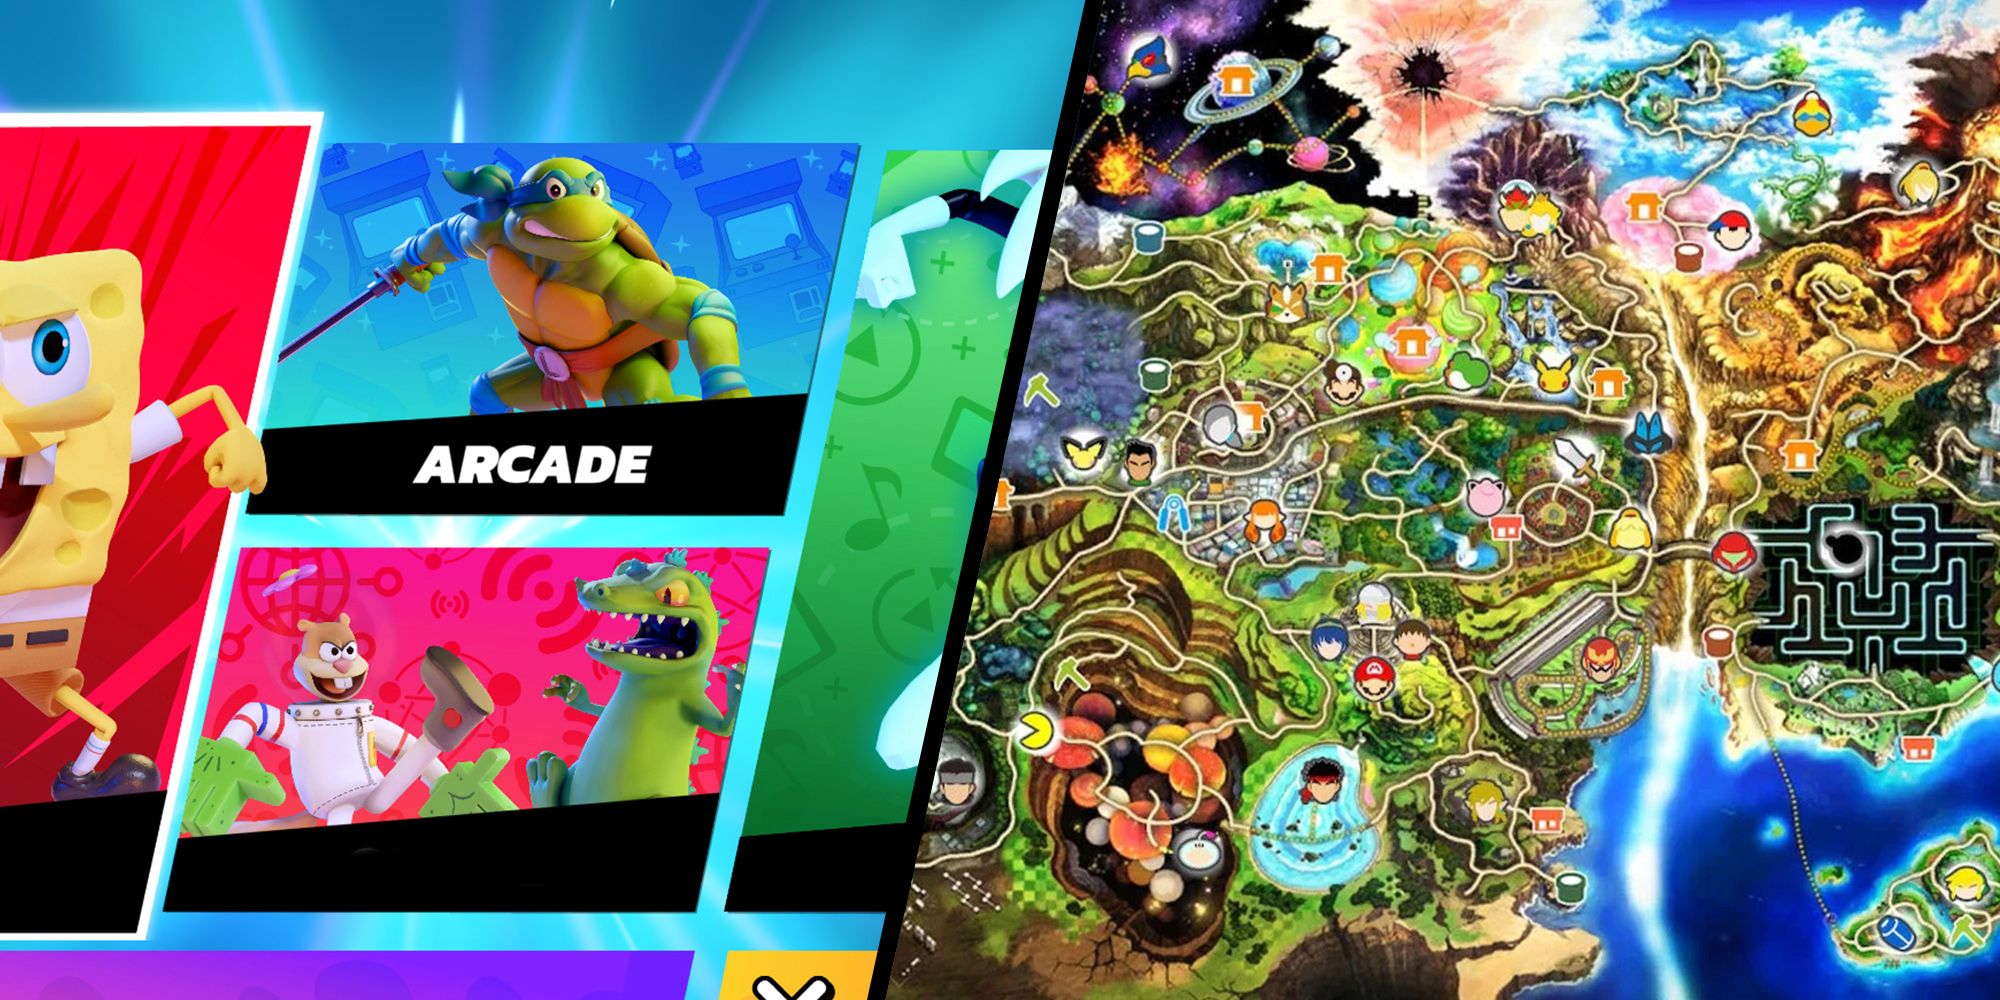 An Image Of All-Star Brawl's Arcade Mode Next To Smash Ultimate's World Of Light World Map